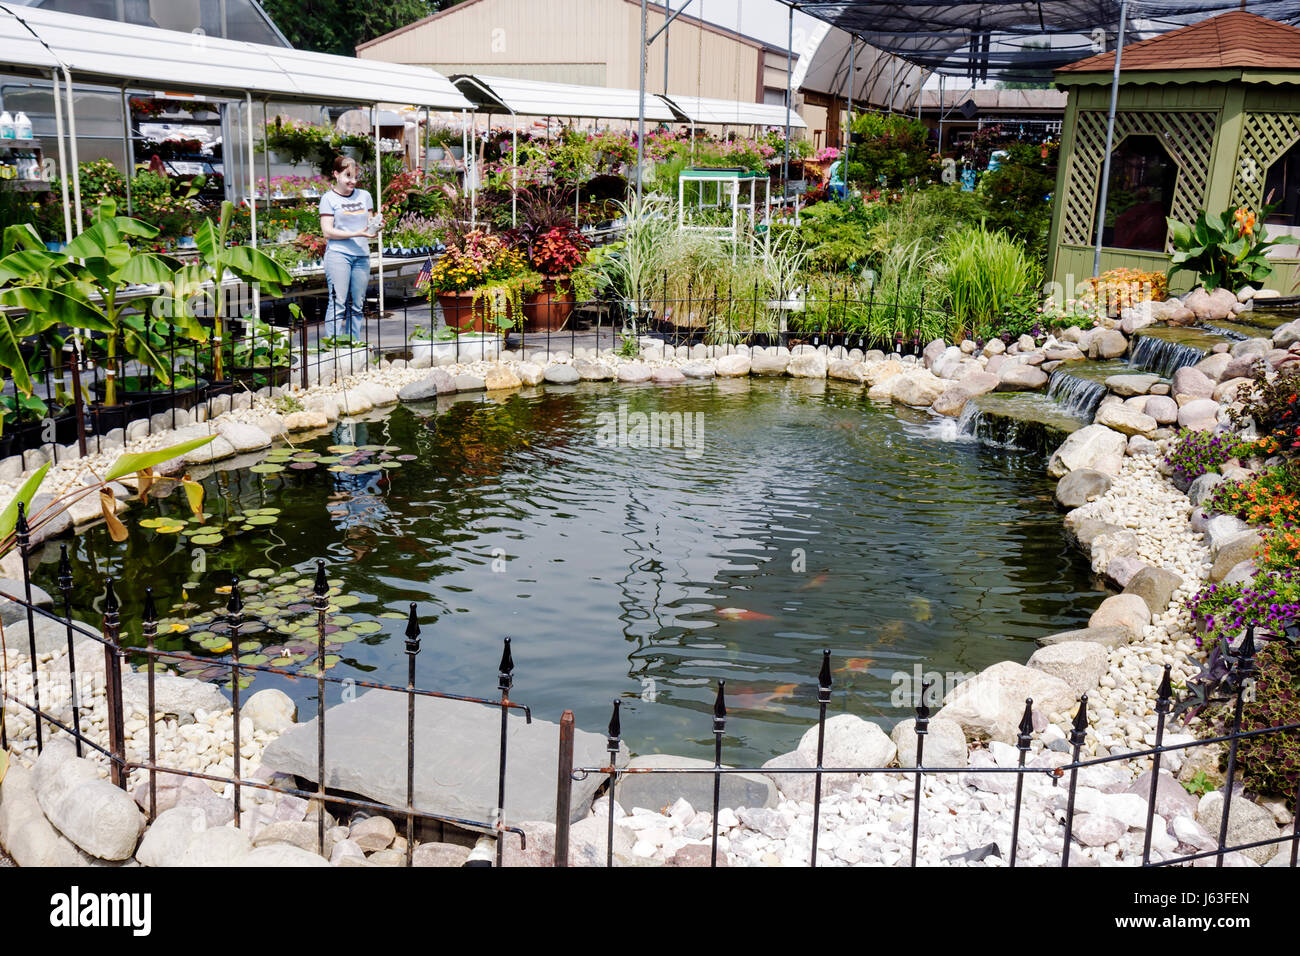 Indiana Chesterton,Chesterton Feed & Garden Center,centre,plant nursery,flower,flower,indoor plants,horticulture,pots,landscaping,pond,waterfall,woman Stock Photo